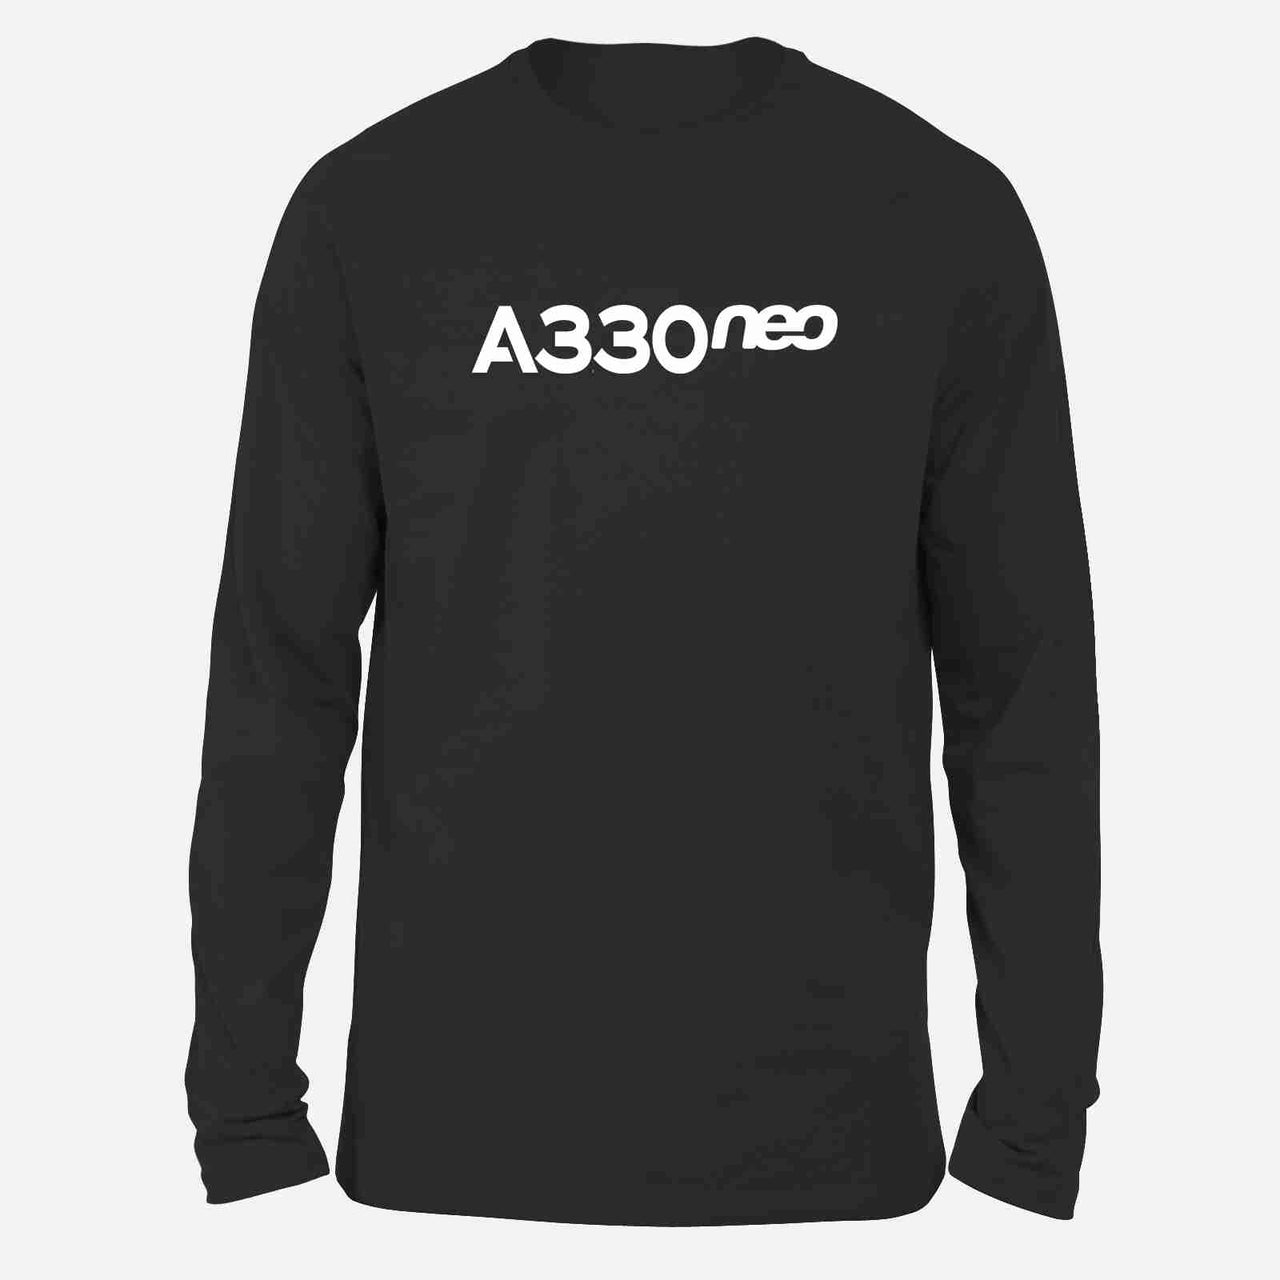 A330neo & Text Designed Long-Sleeve T-Shirts